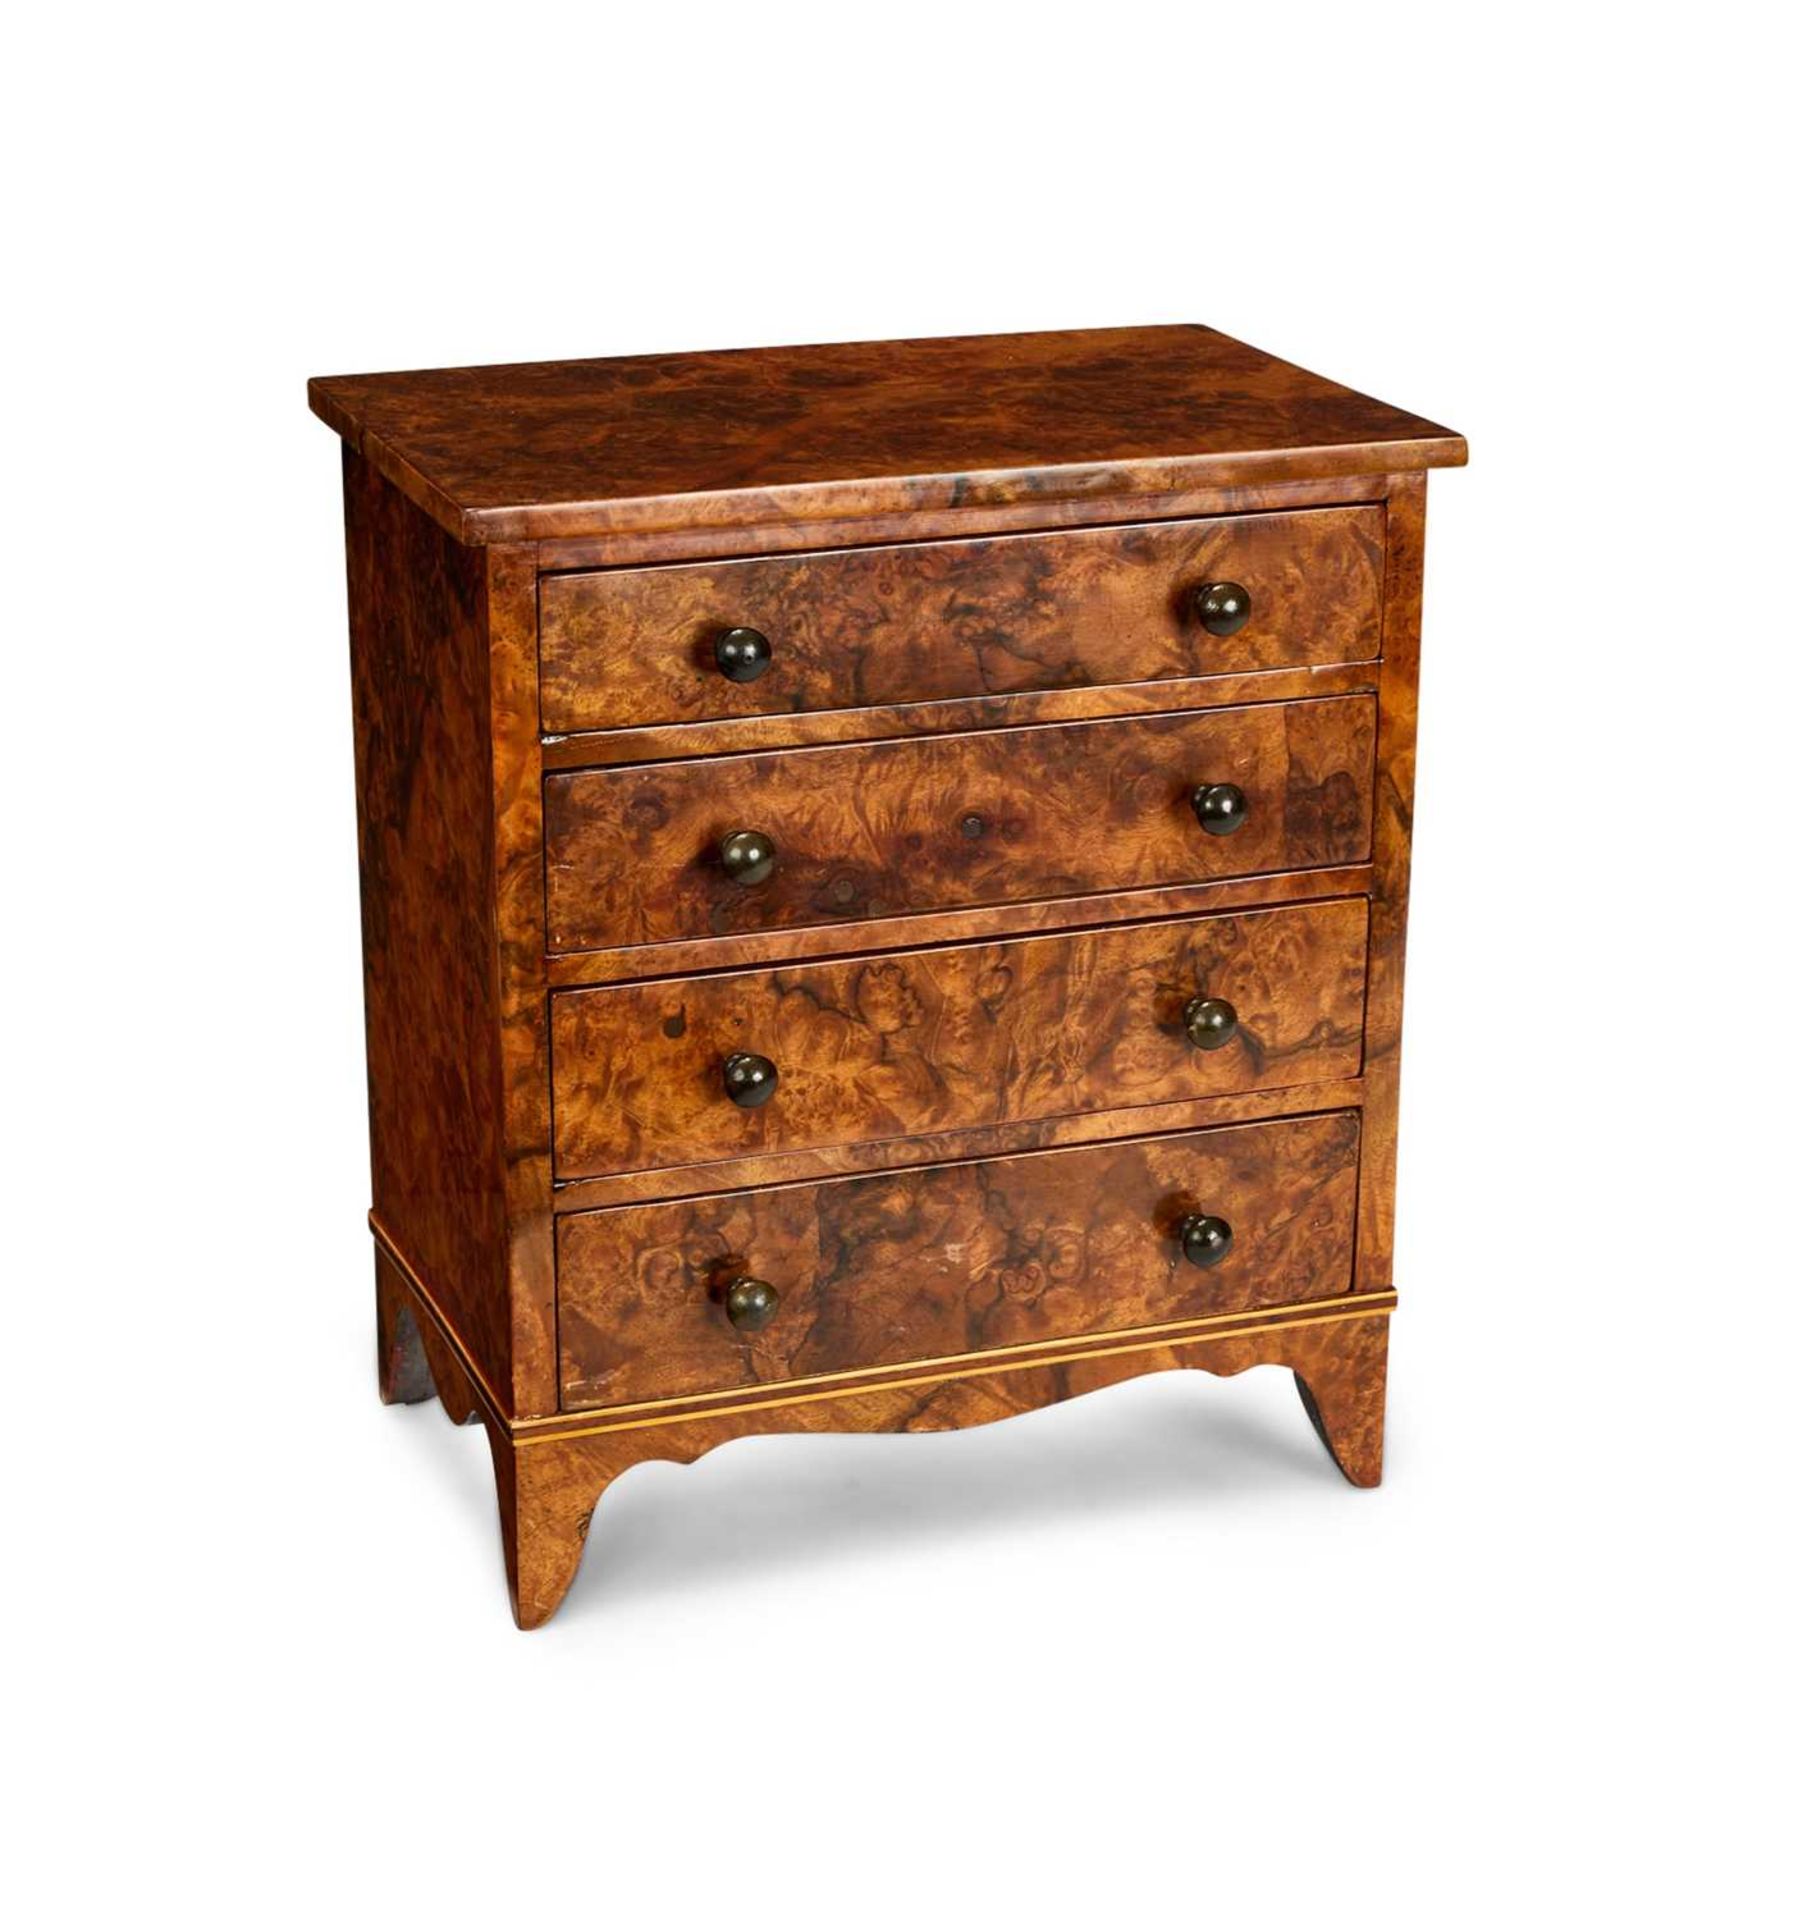 MINIATURE FURNITURE: A LATE 19TH CENTURY BURR WALNUT CHEST OF DRAWERS